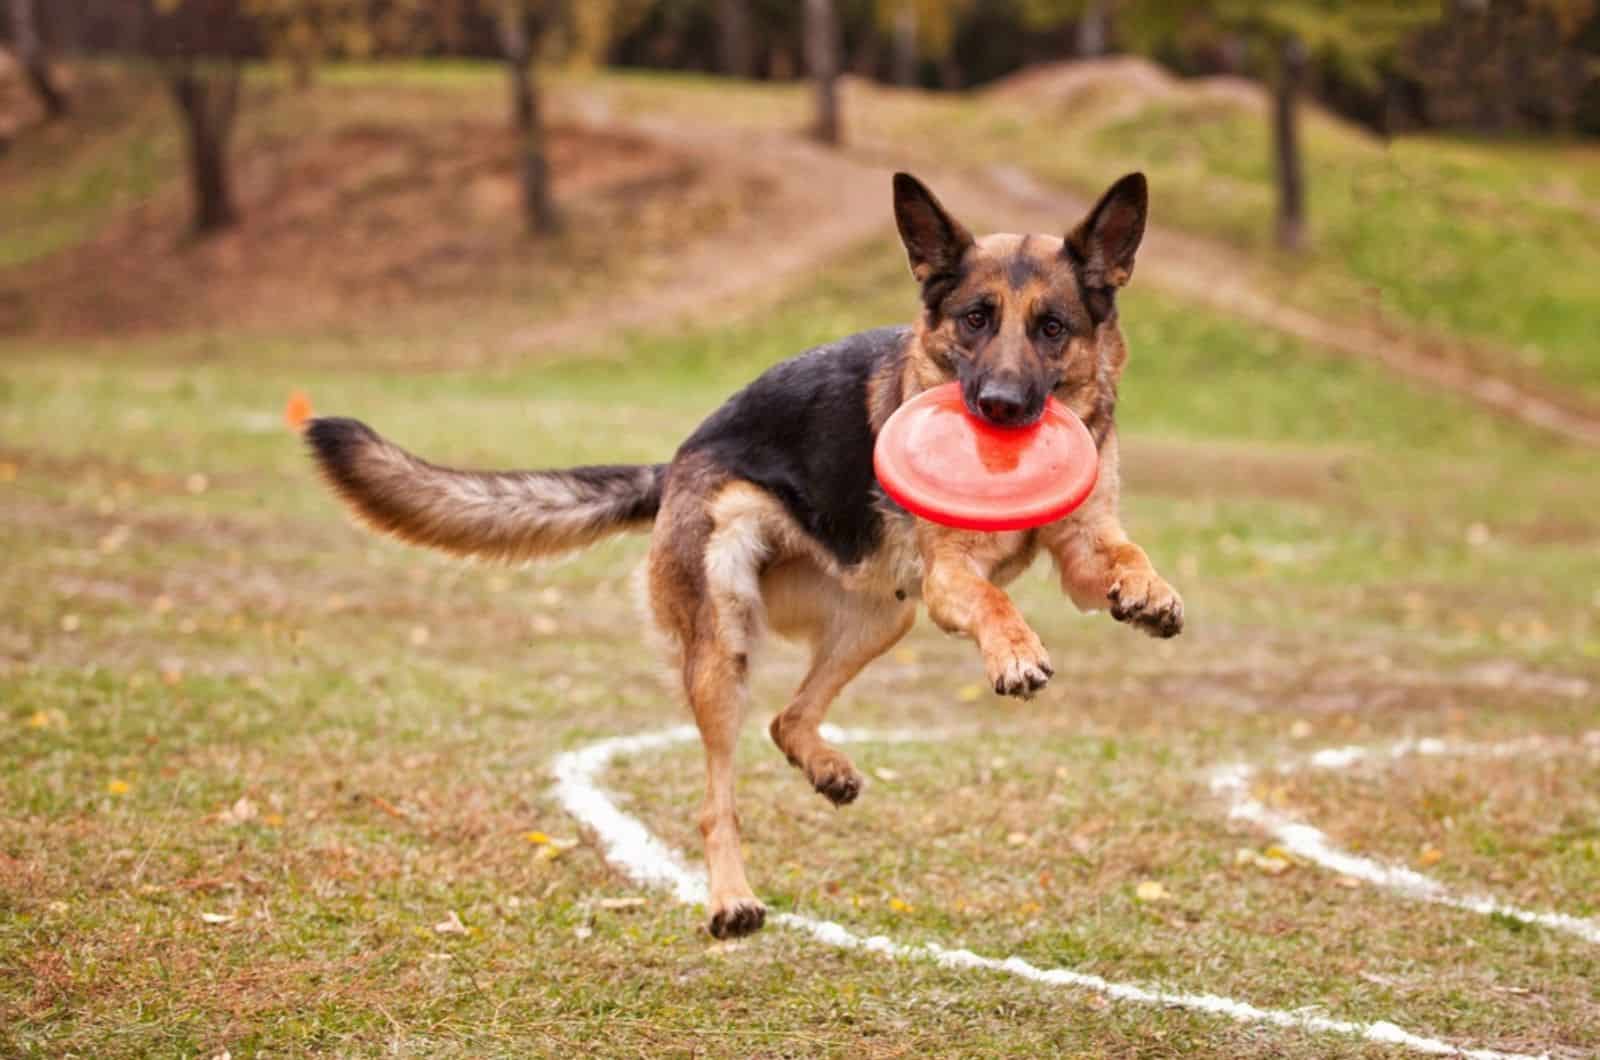 german shepherd dog catches a frisbee in the park